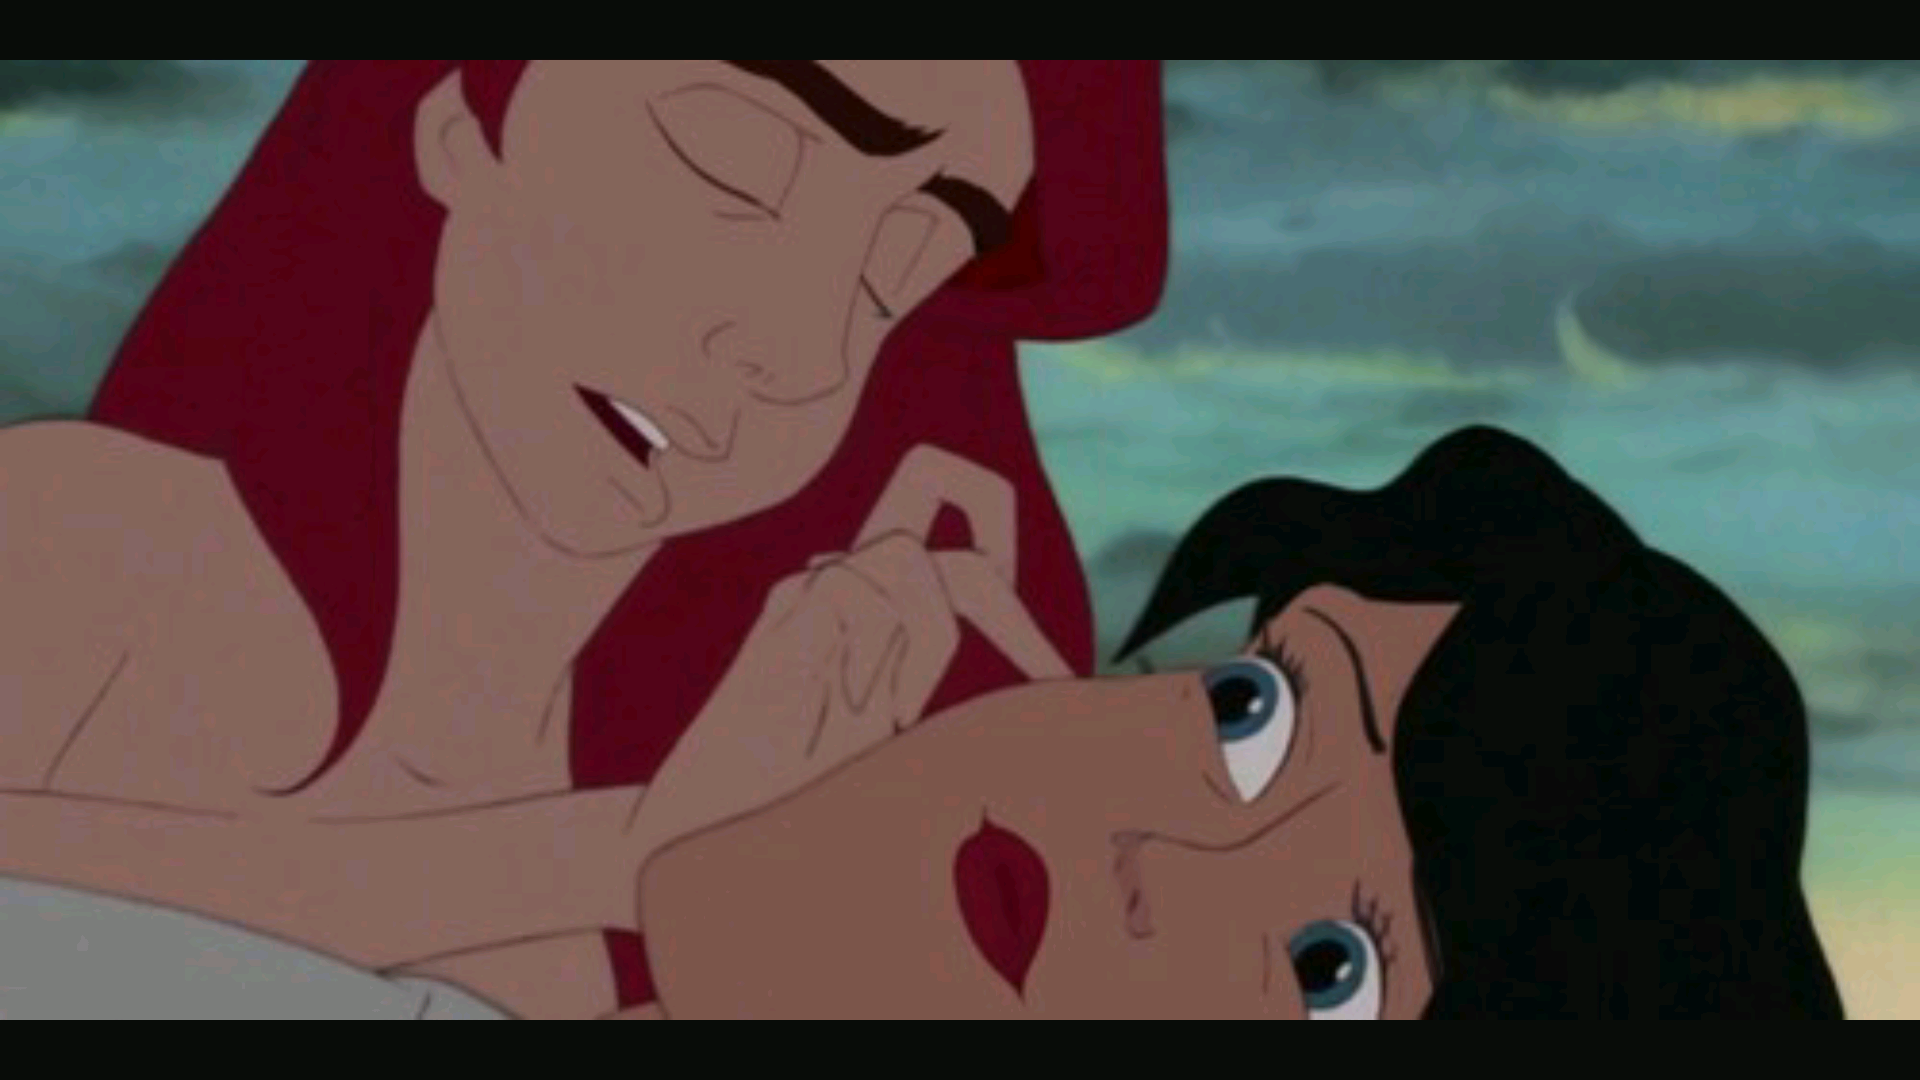 This Eric and Ariel Swap is Plain Creepy